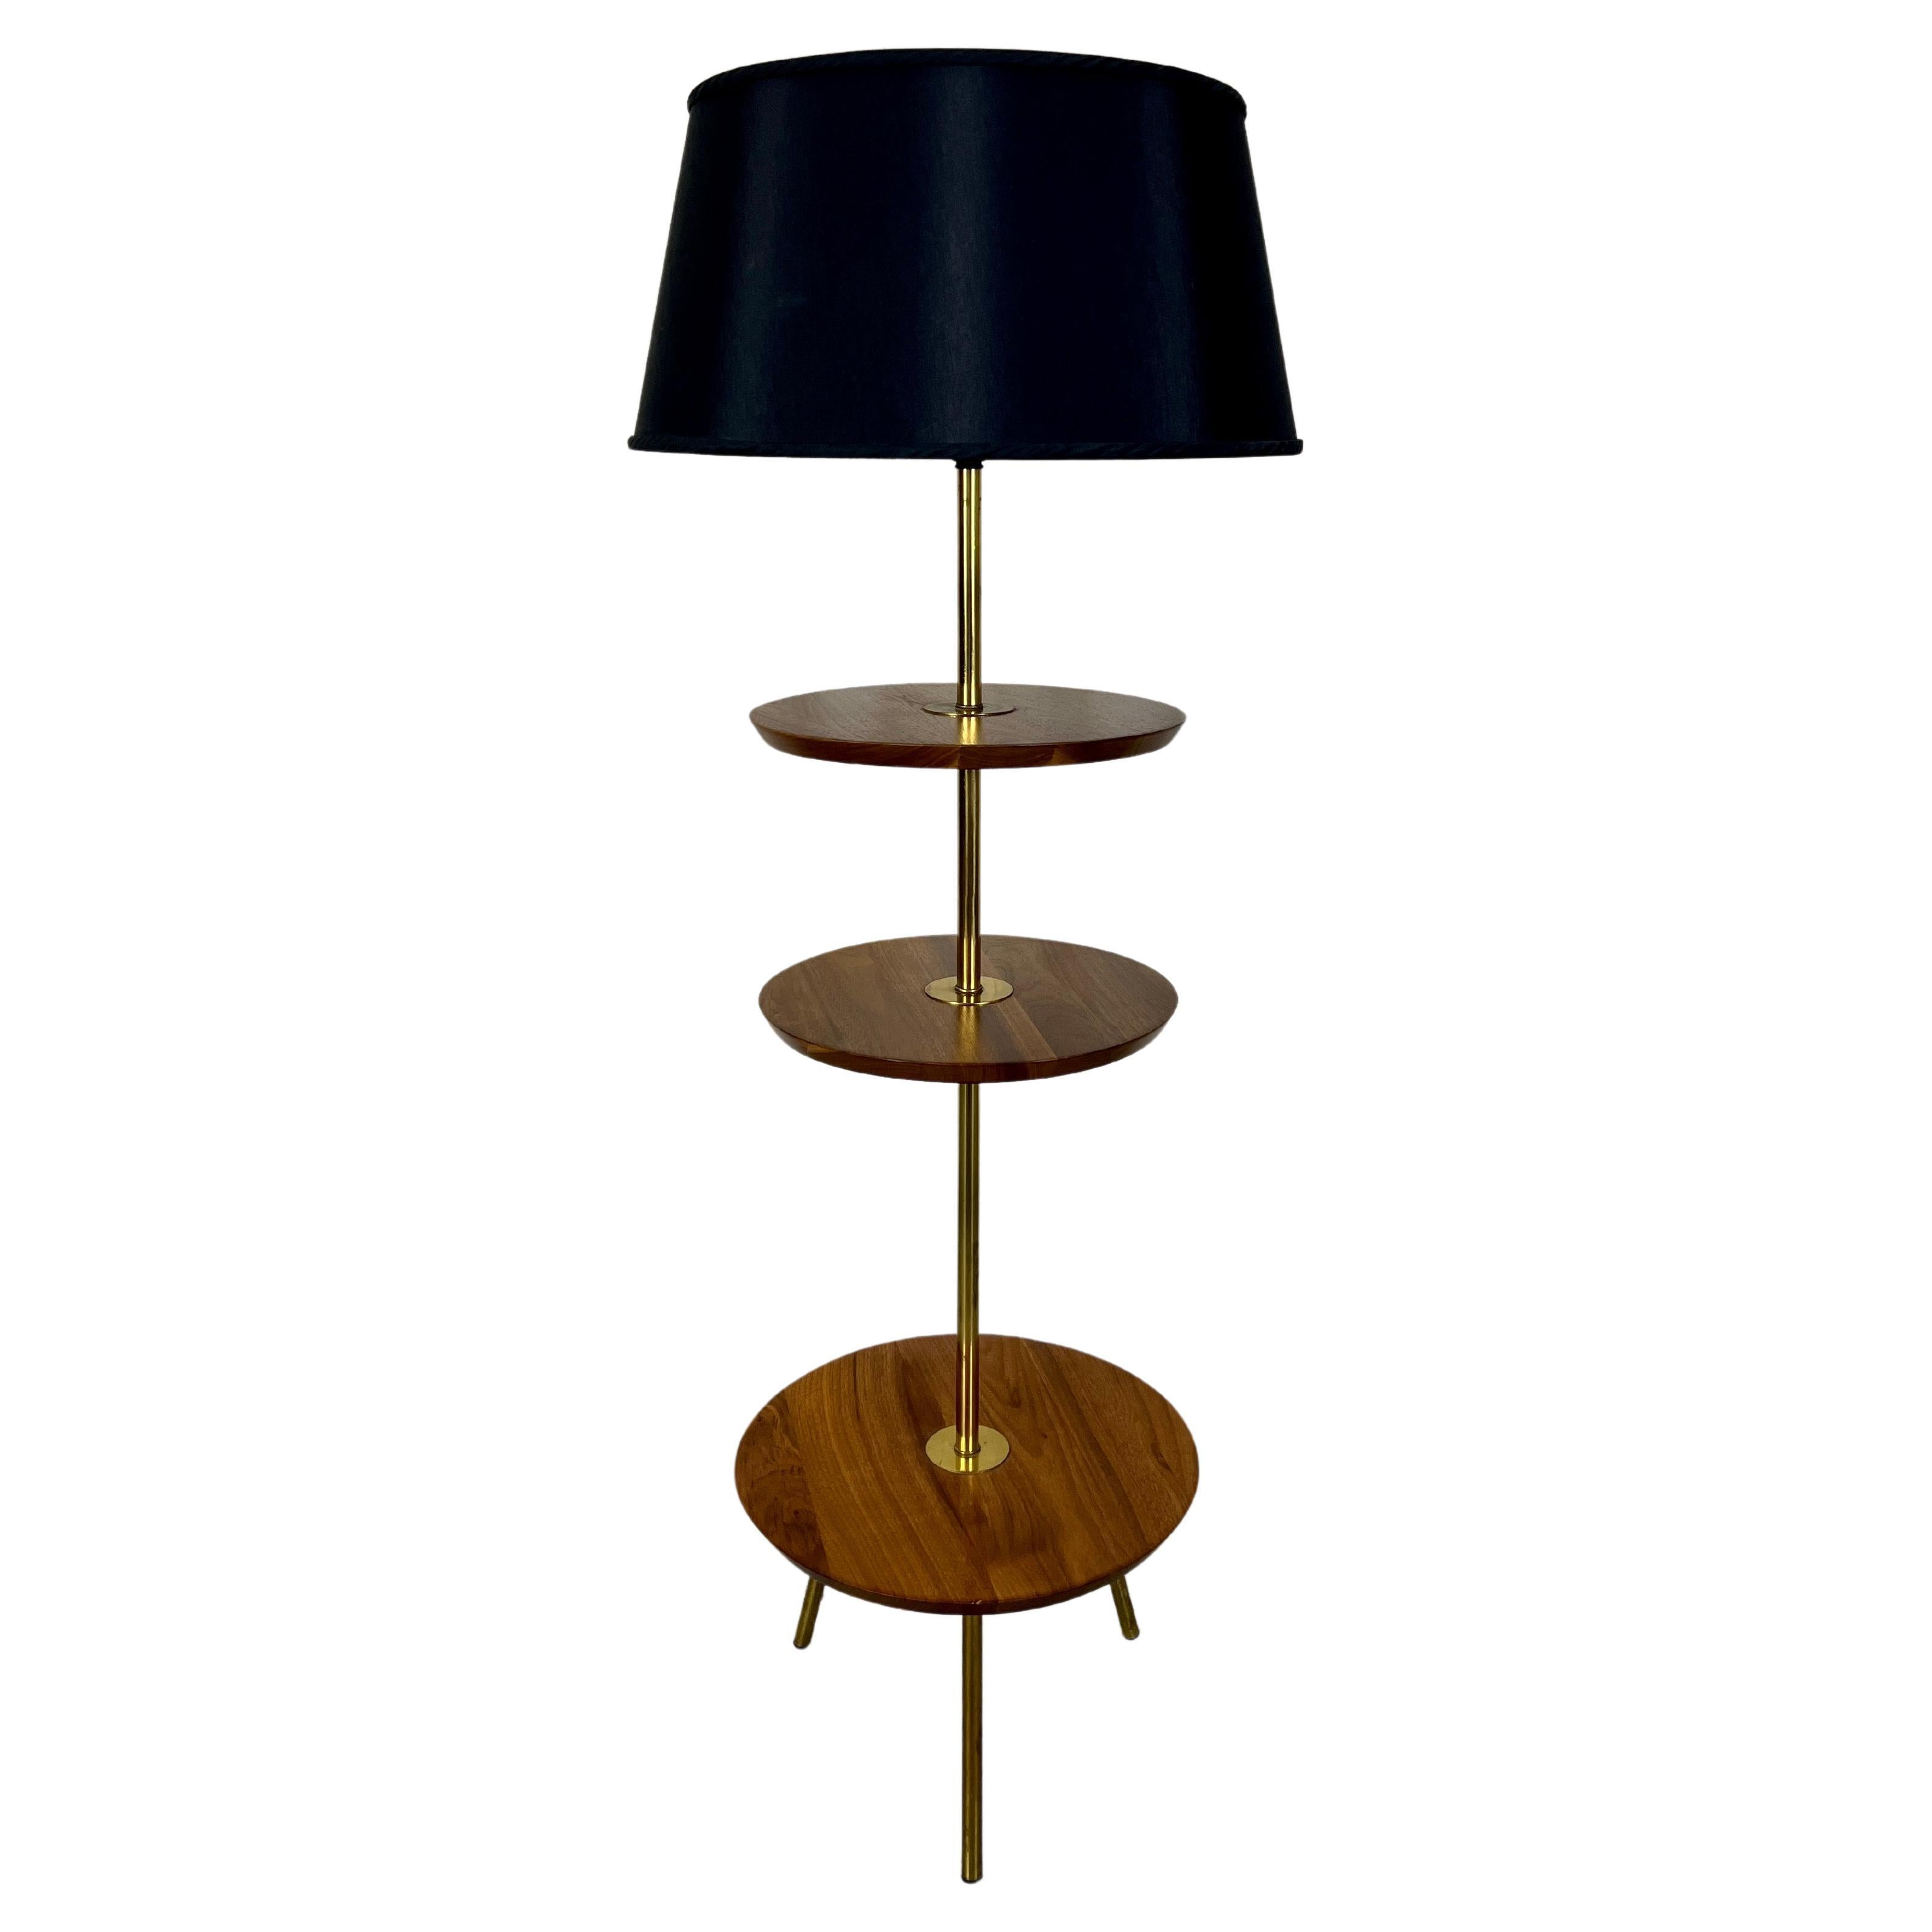 1960s Tri-Tiered Mid-Century Floor Lamp For Sale